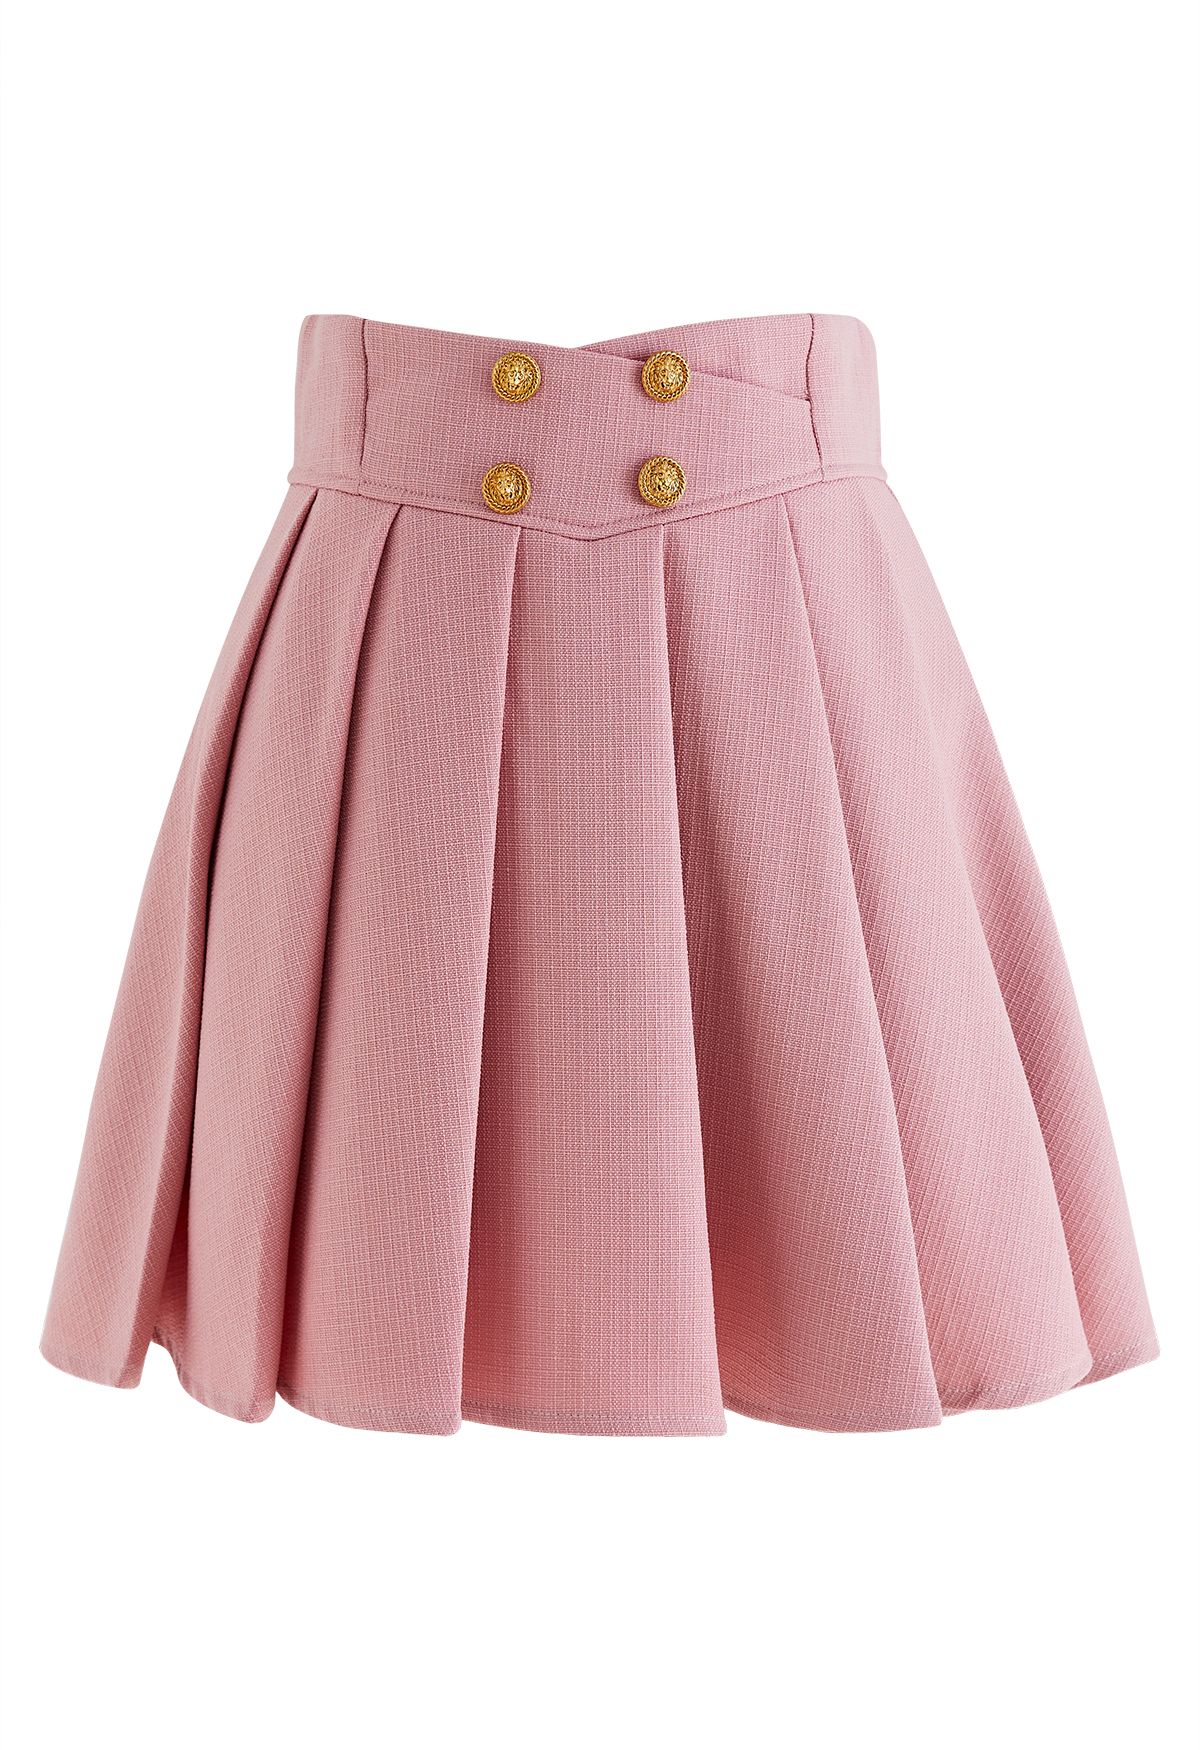 Golden Button Pleated Flare Mini Skirt in Pink - Retro, Indie and Unique  Fashion